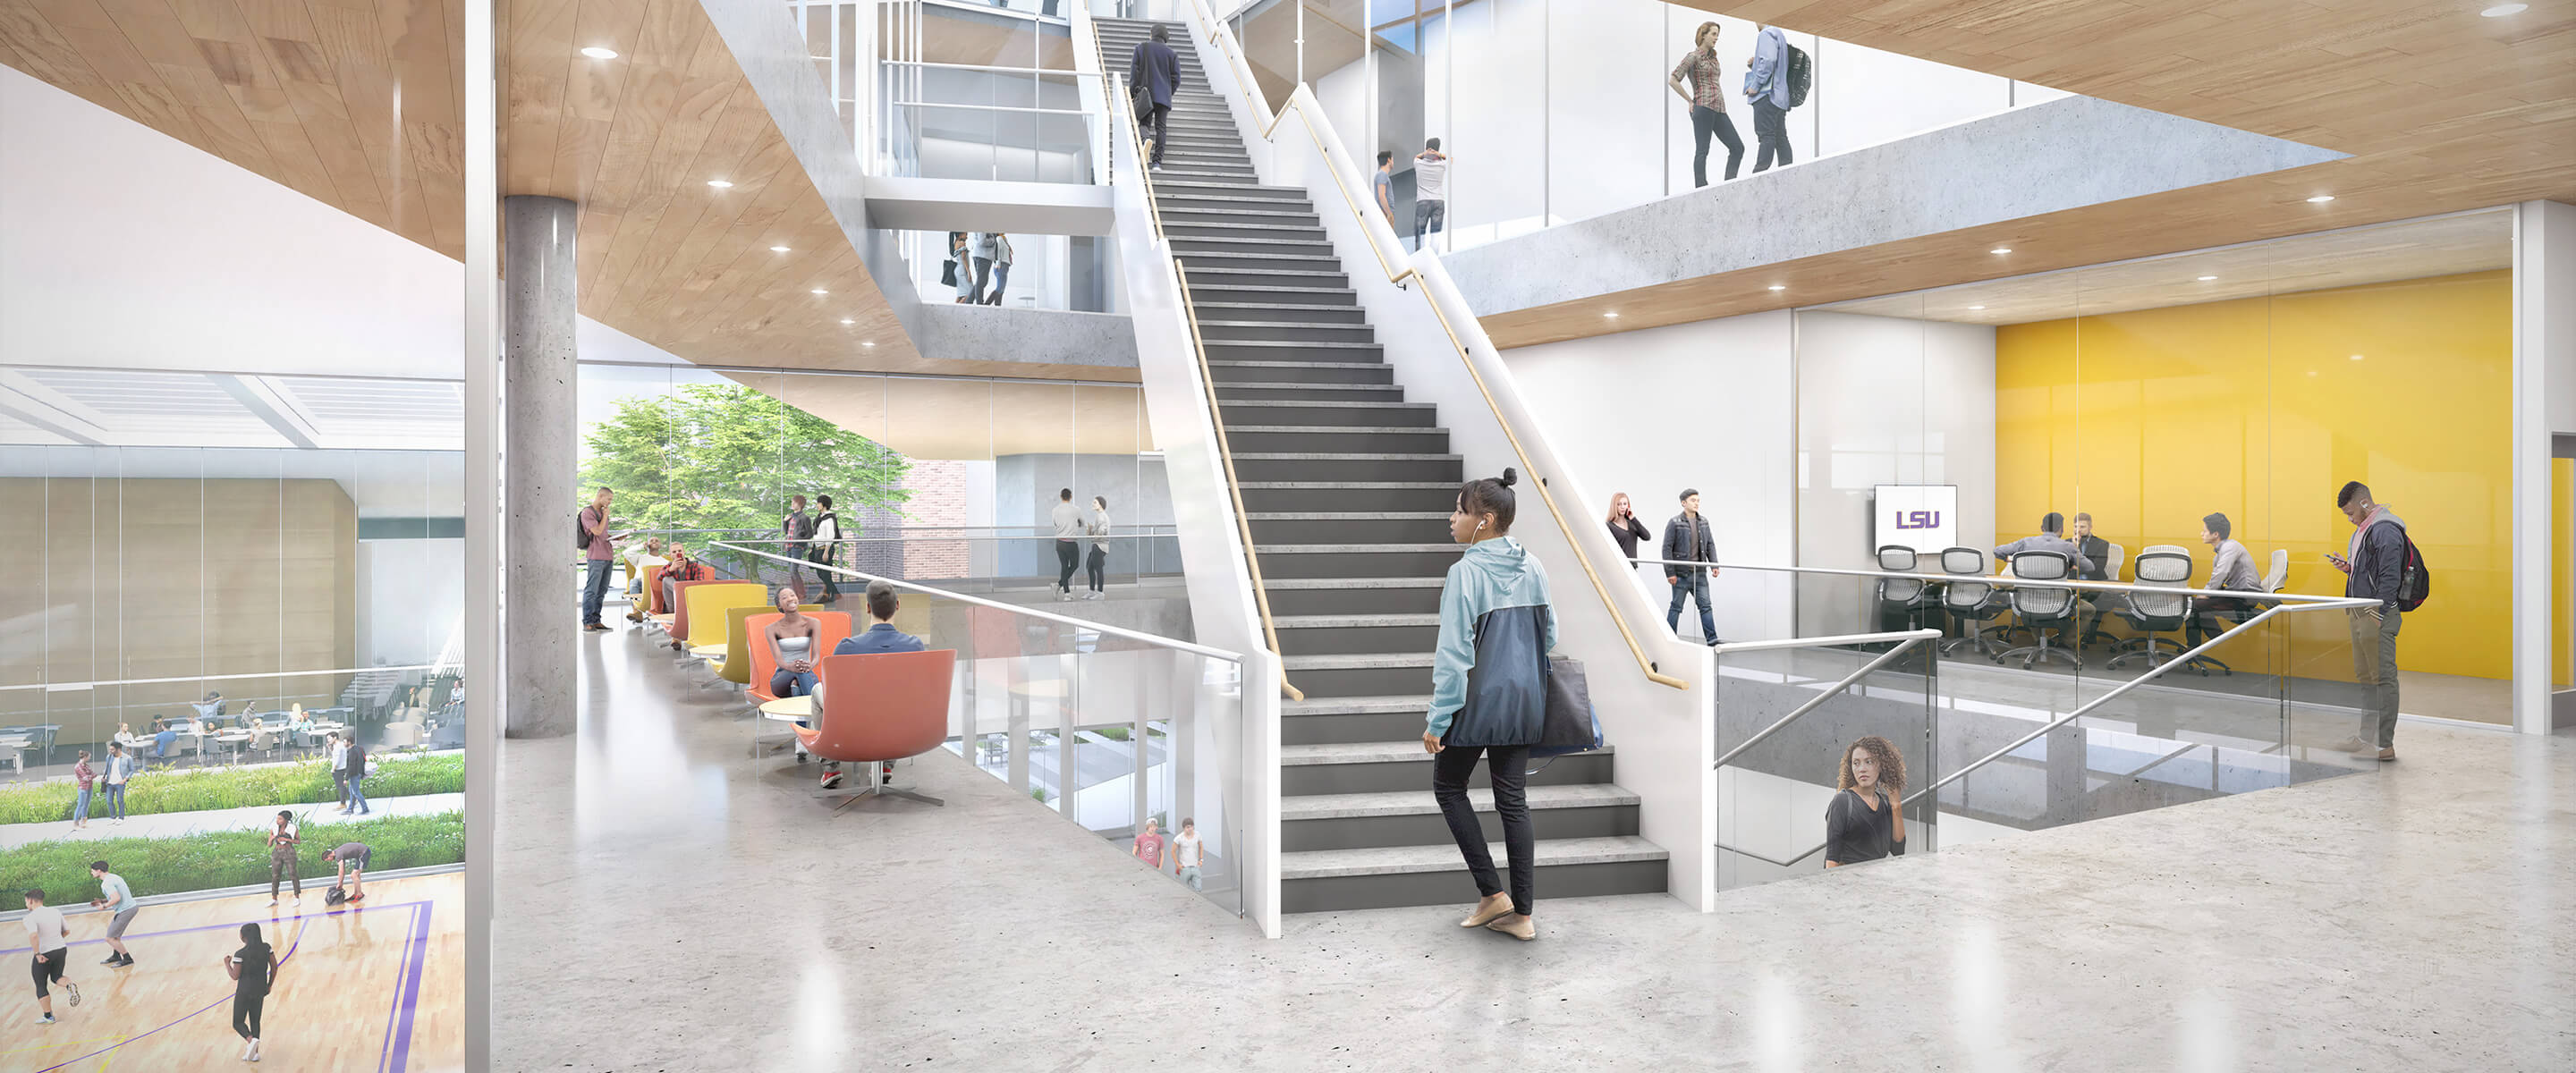 A rendering of the building's interior with students actively using the space